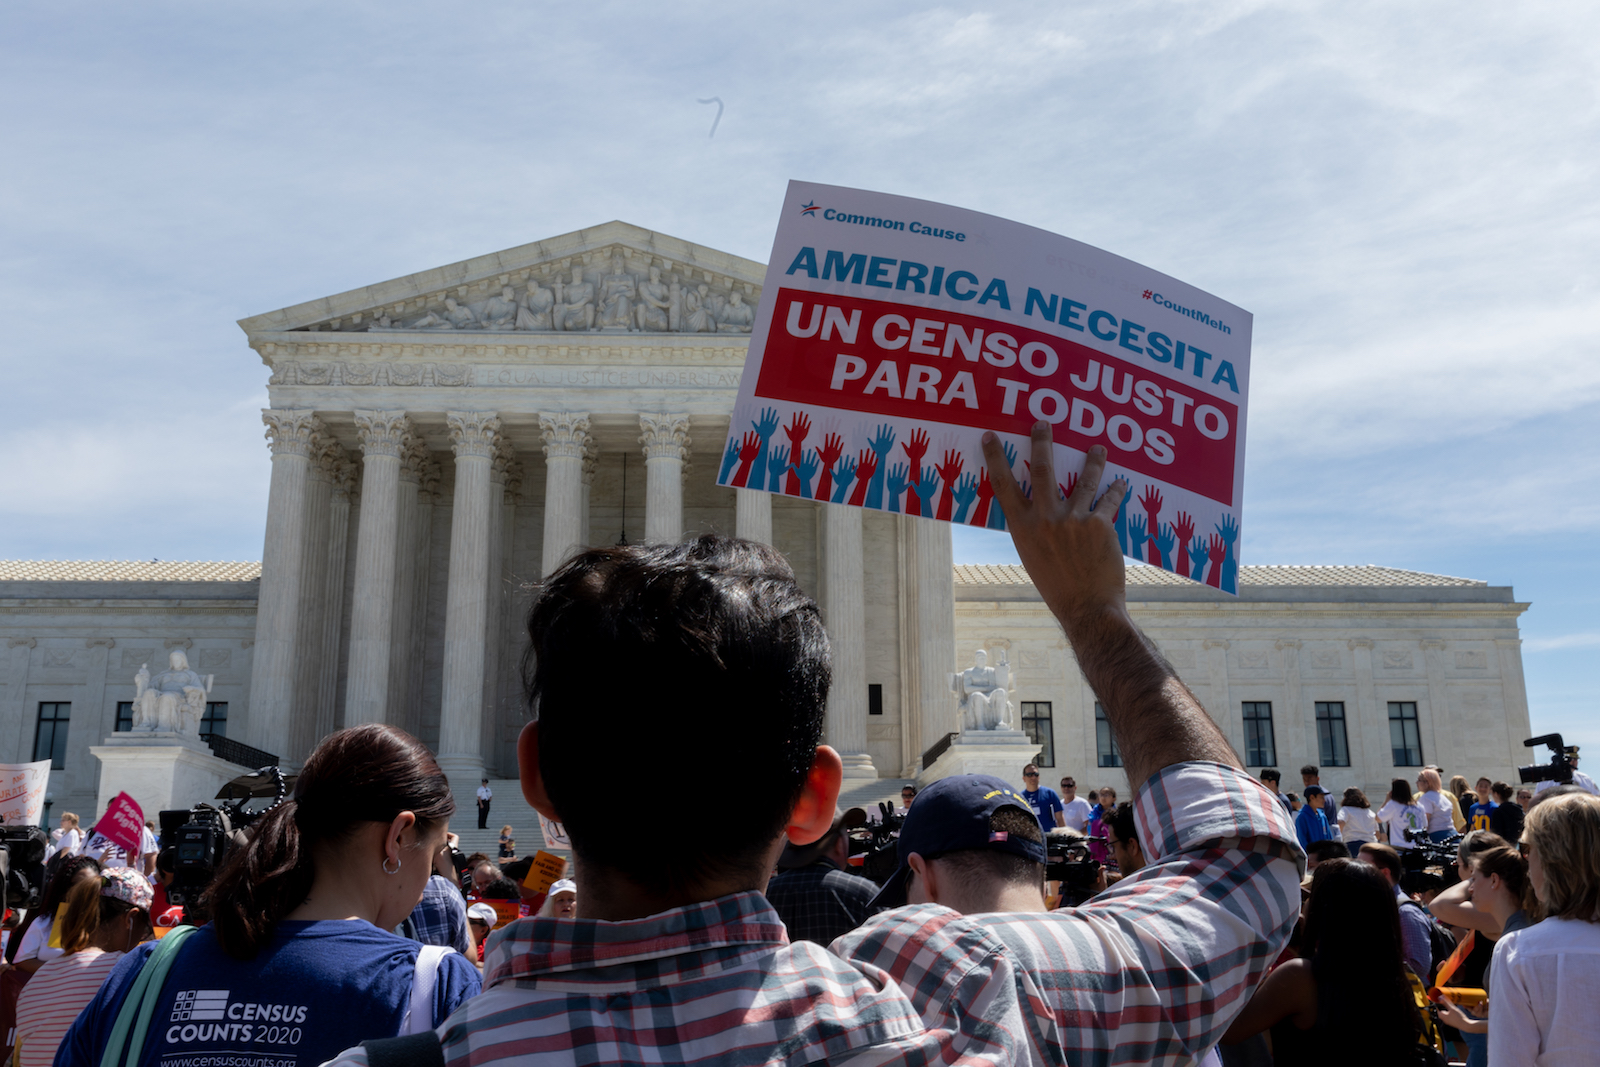 While The Trump administration’s push for a citizenship question failed, advocates say it, and lack of funding did their damage. Photo: Aurora Samperio/NurPhoto via Getty Images